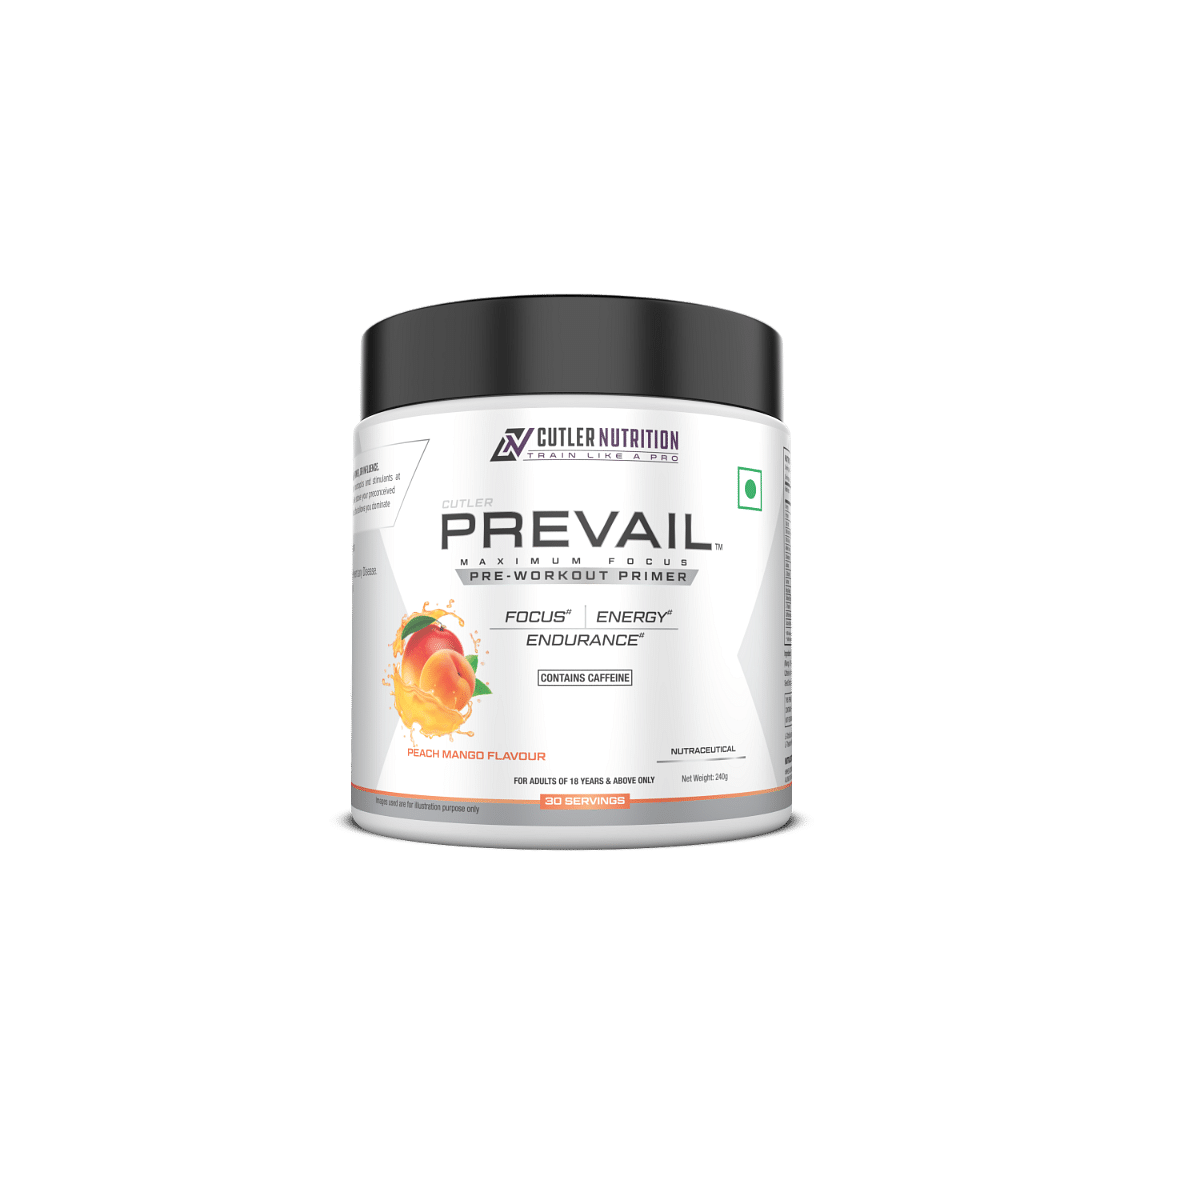 

Cutler Nutrition Prevail Pre Workout Powder: Pre-Workout Drink for Men and Women, Cutting Edge Energy and Focus Supplement with L Citrulline, Tauri...